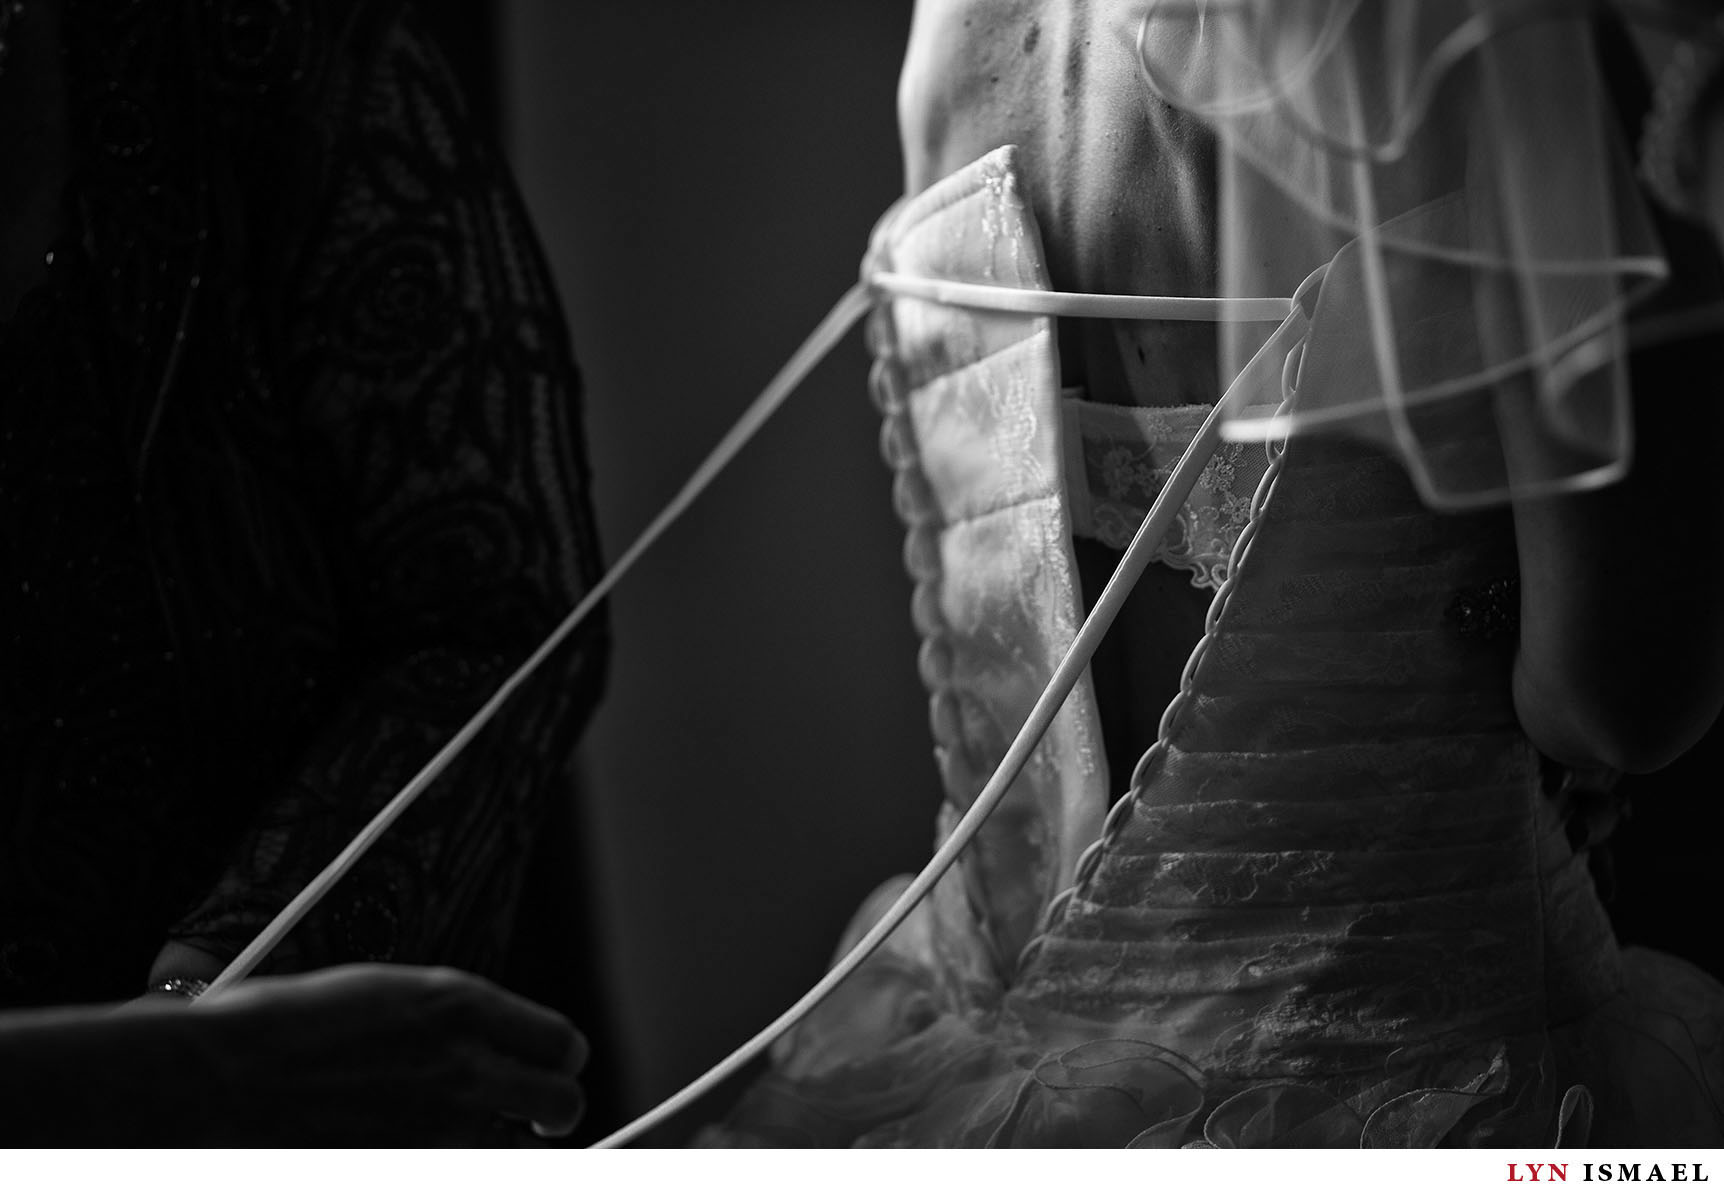 A dramatically lit image of the bride getting ready.